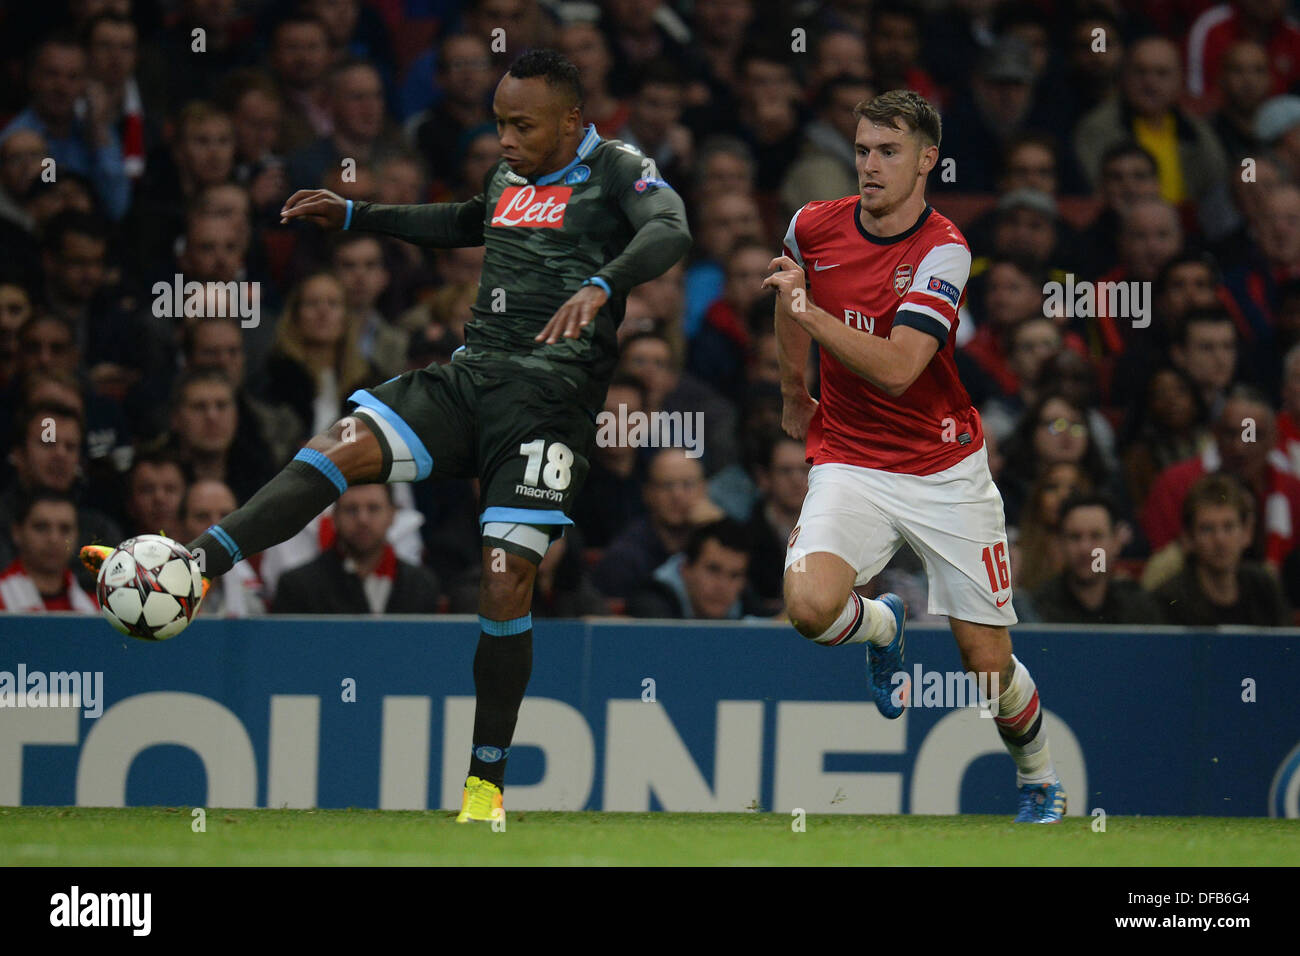 London, UK. 01st Oct, 2013. Napoli's defender Camilo Zuniga from Columbia and Arsenal's midfielder Aaron Ramsey from Wales during the UEFA Champions League match between Arsenal from England and Napoli from Italy played at The Emirates Stadium, on October 01, 2013 in London, England. © Mitchell Gunn/ESPA/Alamy Live News Stock Photo